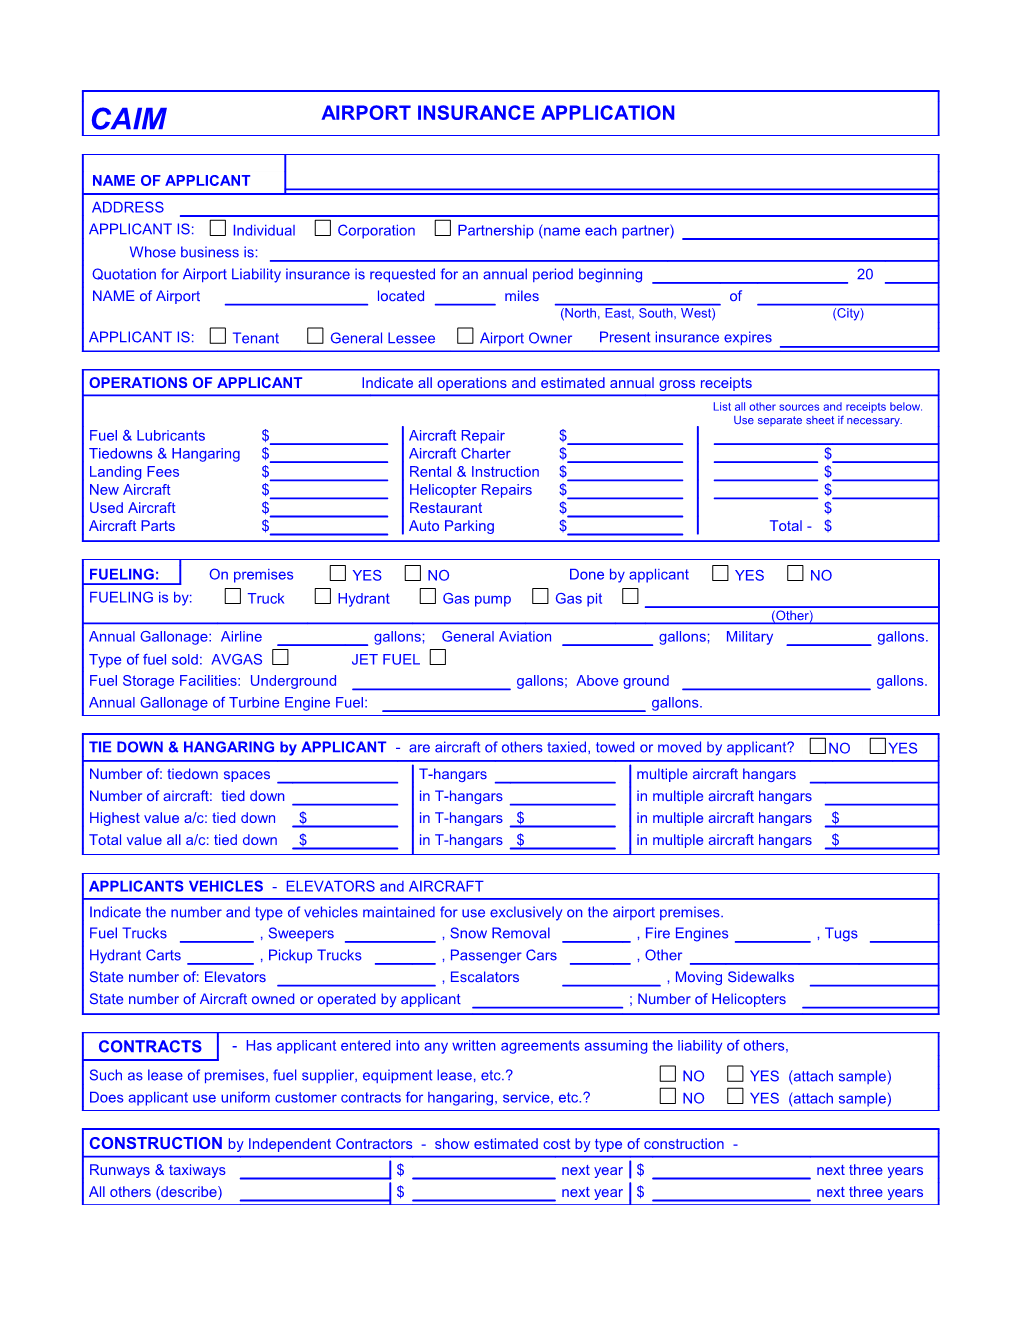 Airport Insurance Application